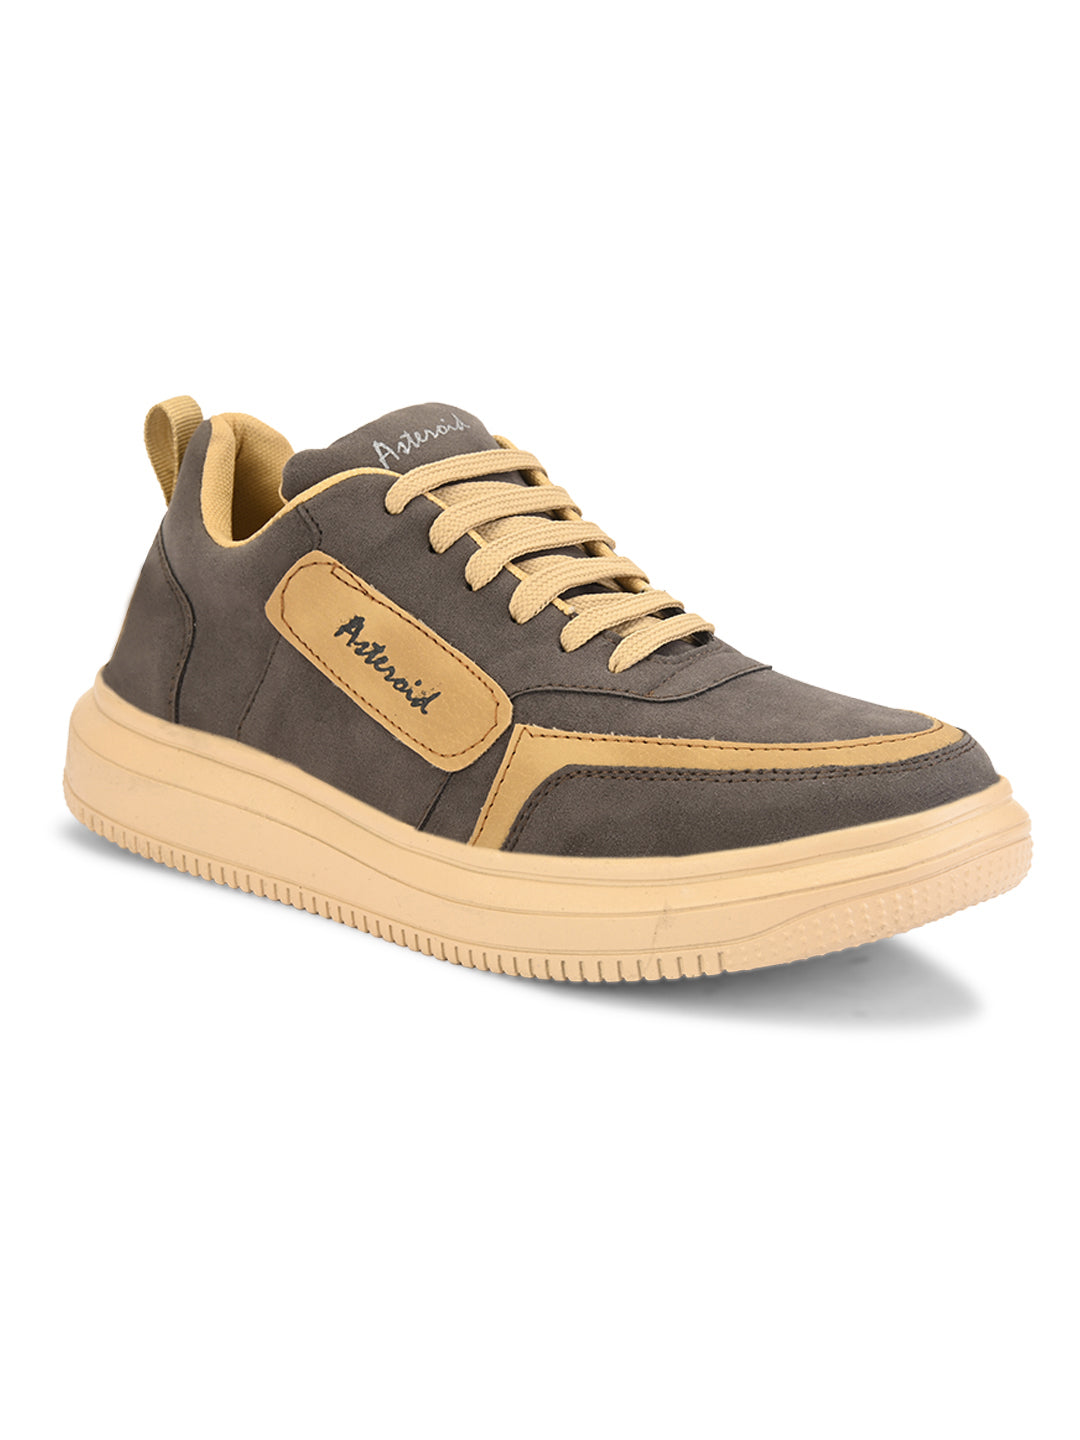 ASTEROID Suede Casual Sneakers.